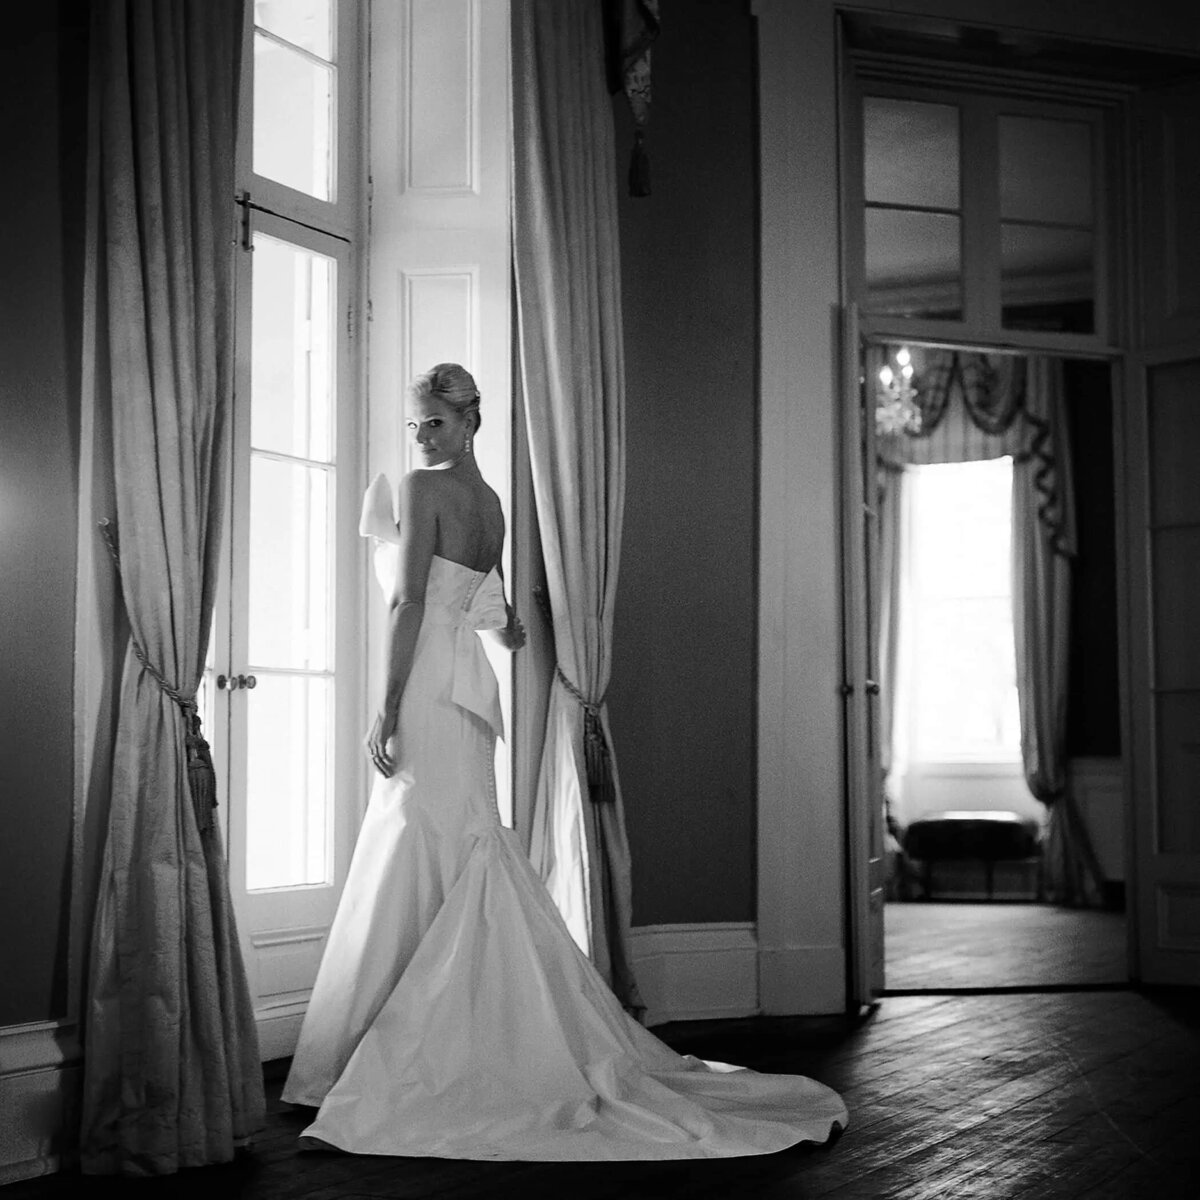 A bride in a chic wedding dress stands by a window in a vintage room, her back to the camera